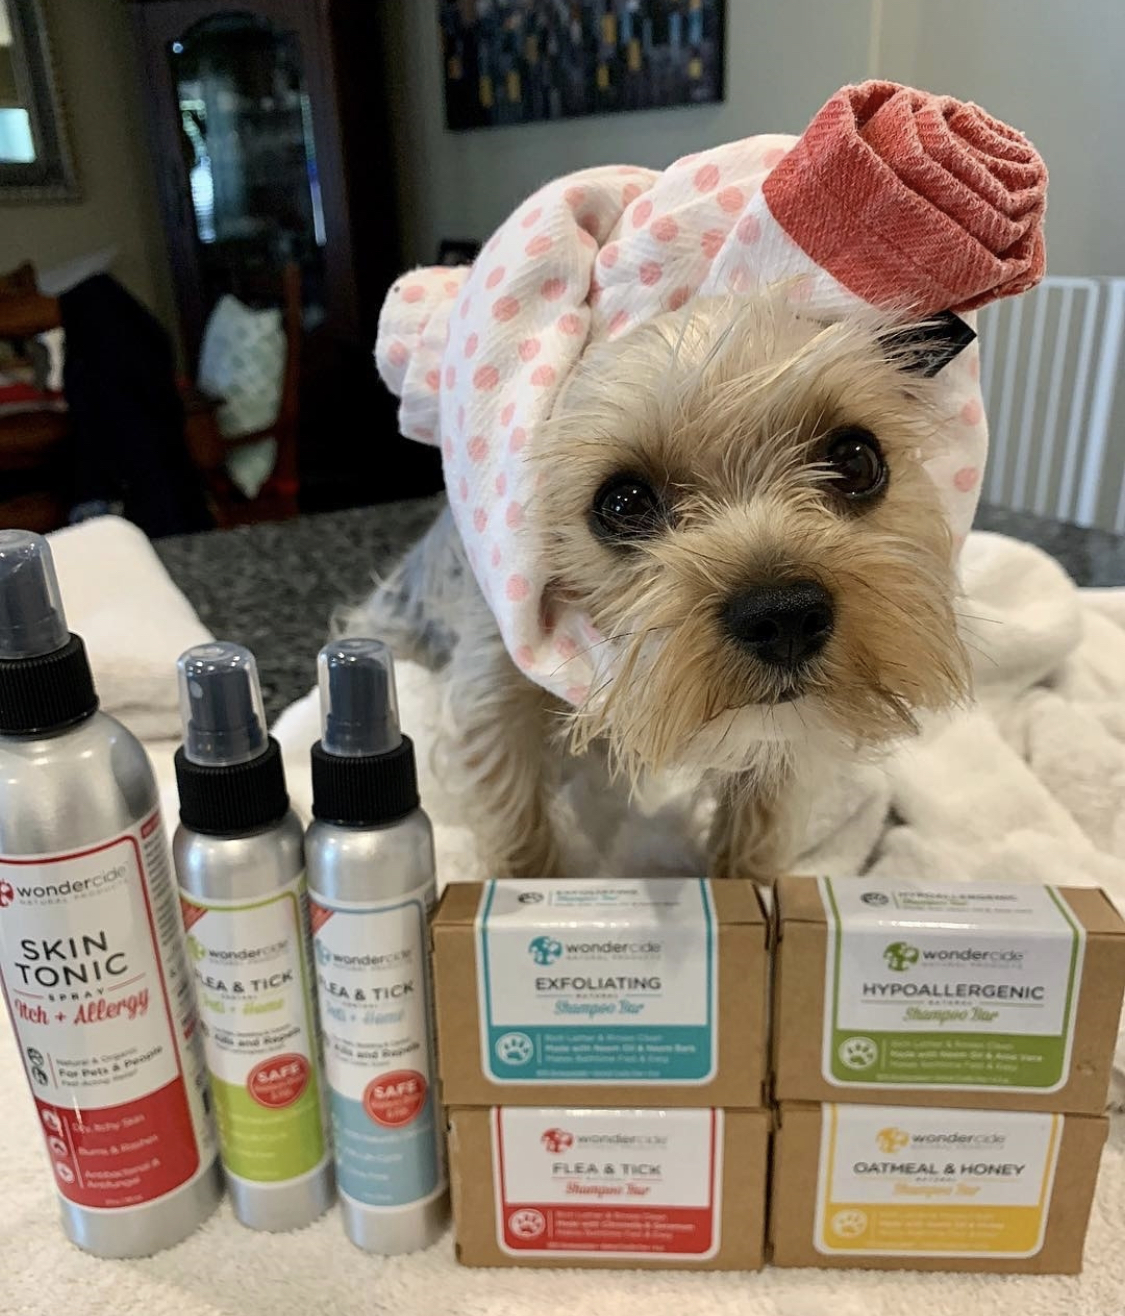 Yorkshire Terrier with a towel tied around its head sitting behind the bar soaps and shampoo